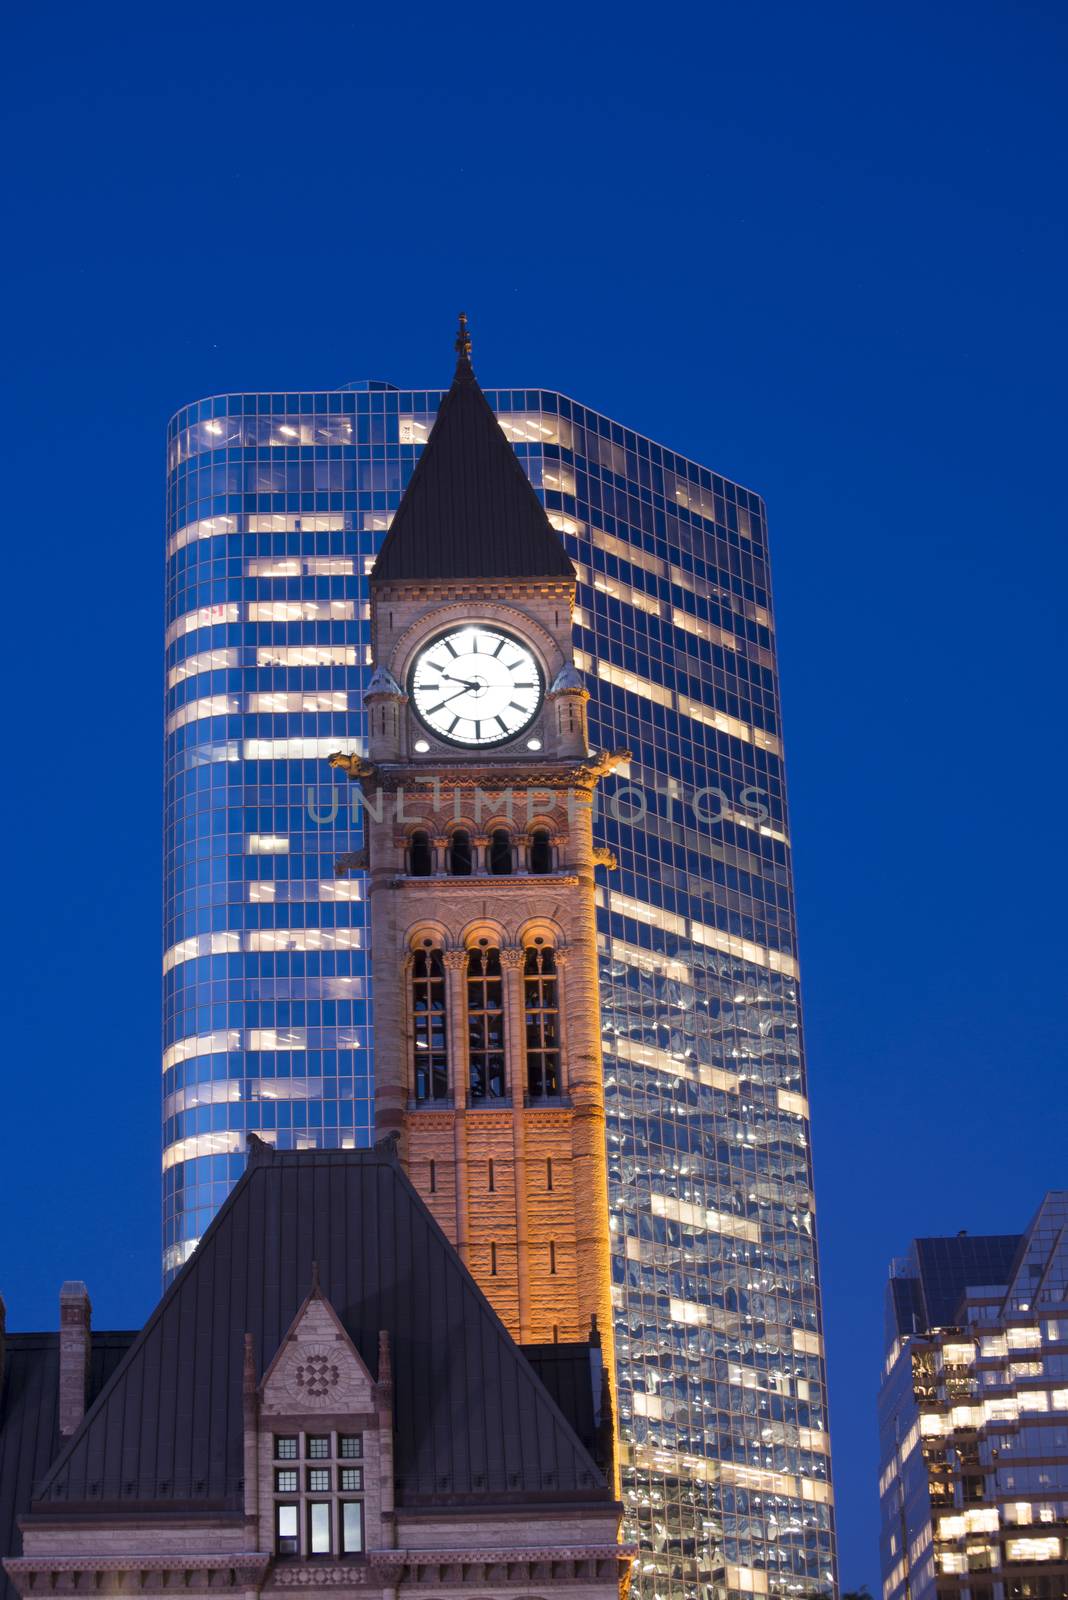 Detail of Toronto's city hall tower clock at dusk against modern building